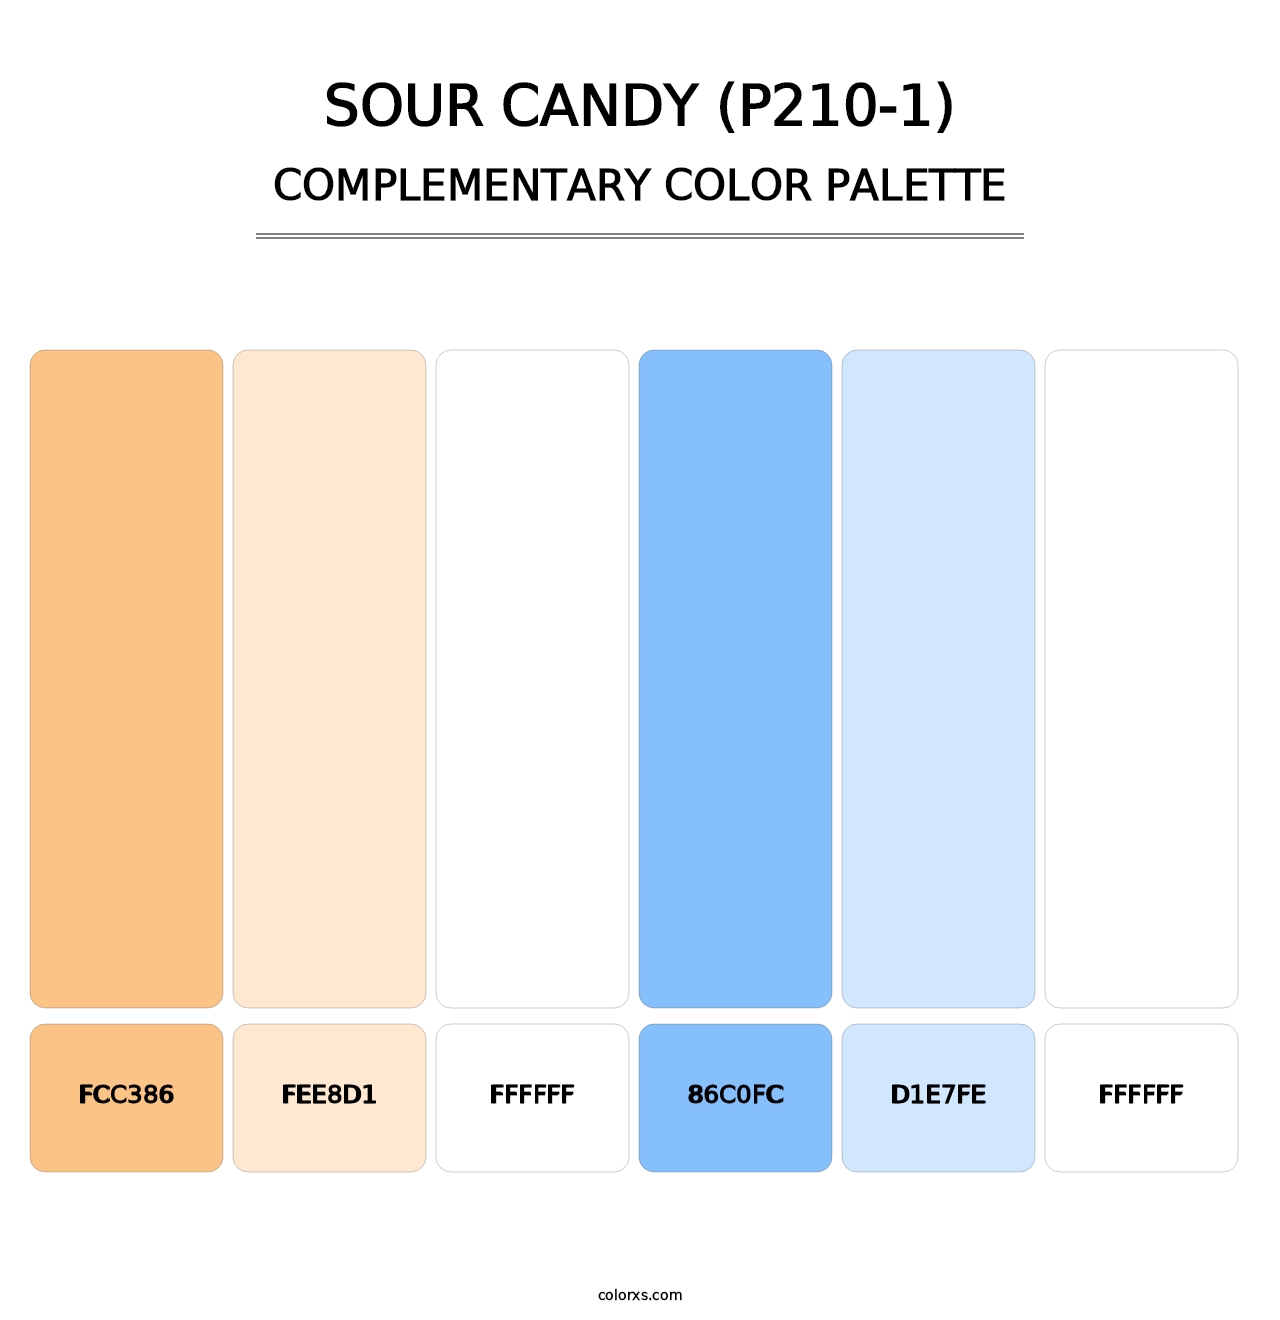 Sour Candy (P210-1) - Complementary Color Palette